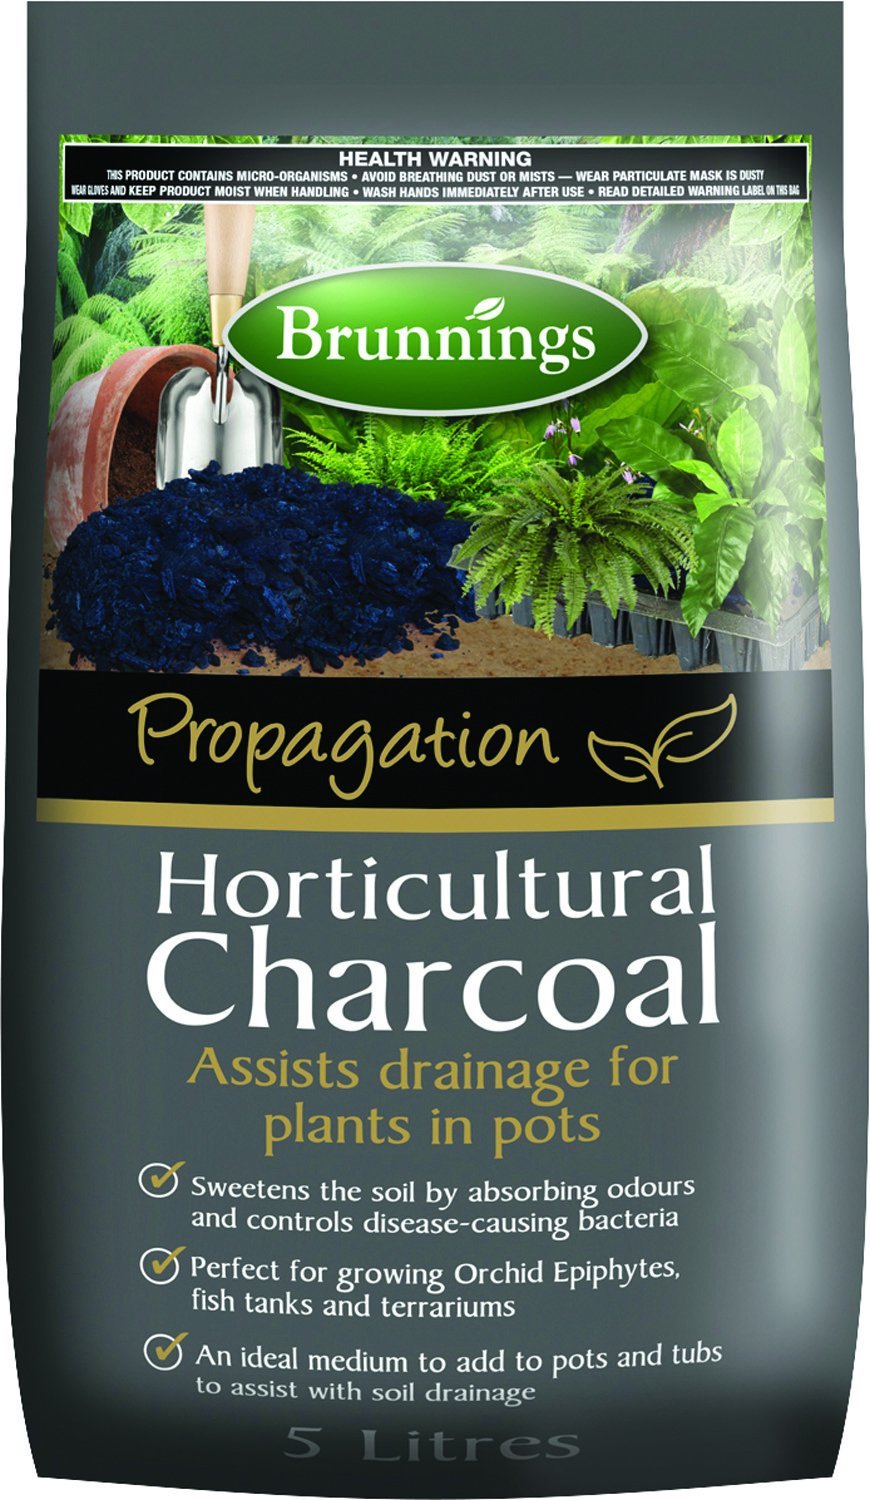 Brunnings Charcoal Horticultural 5 Litre - Woonona Petfood & Produce